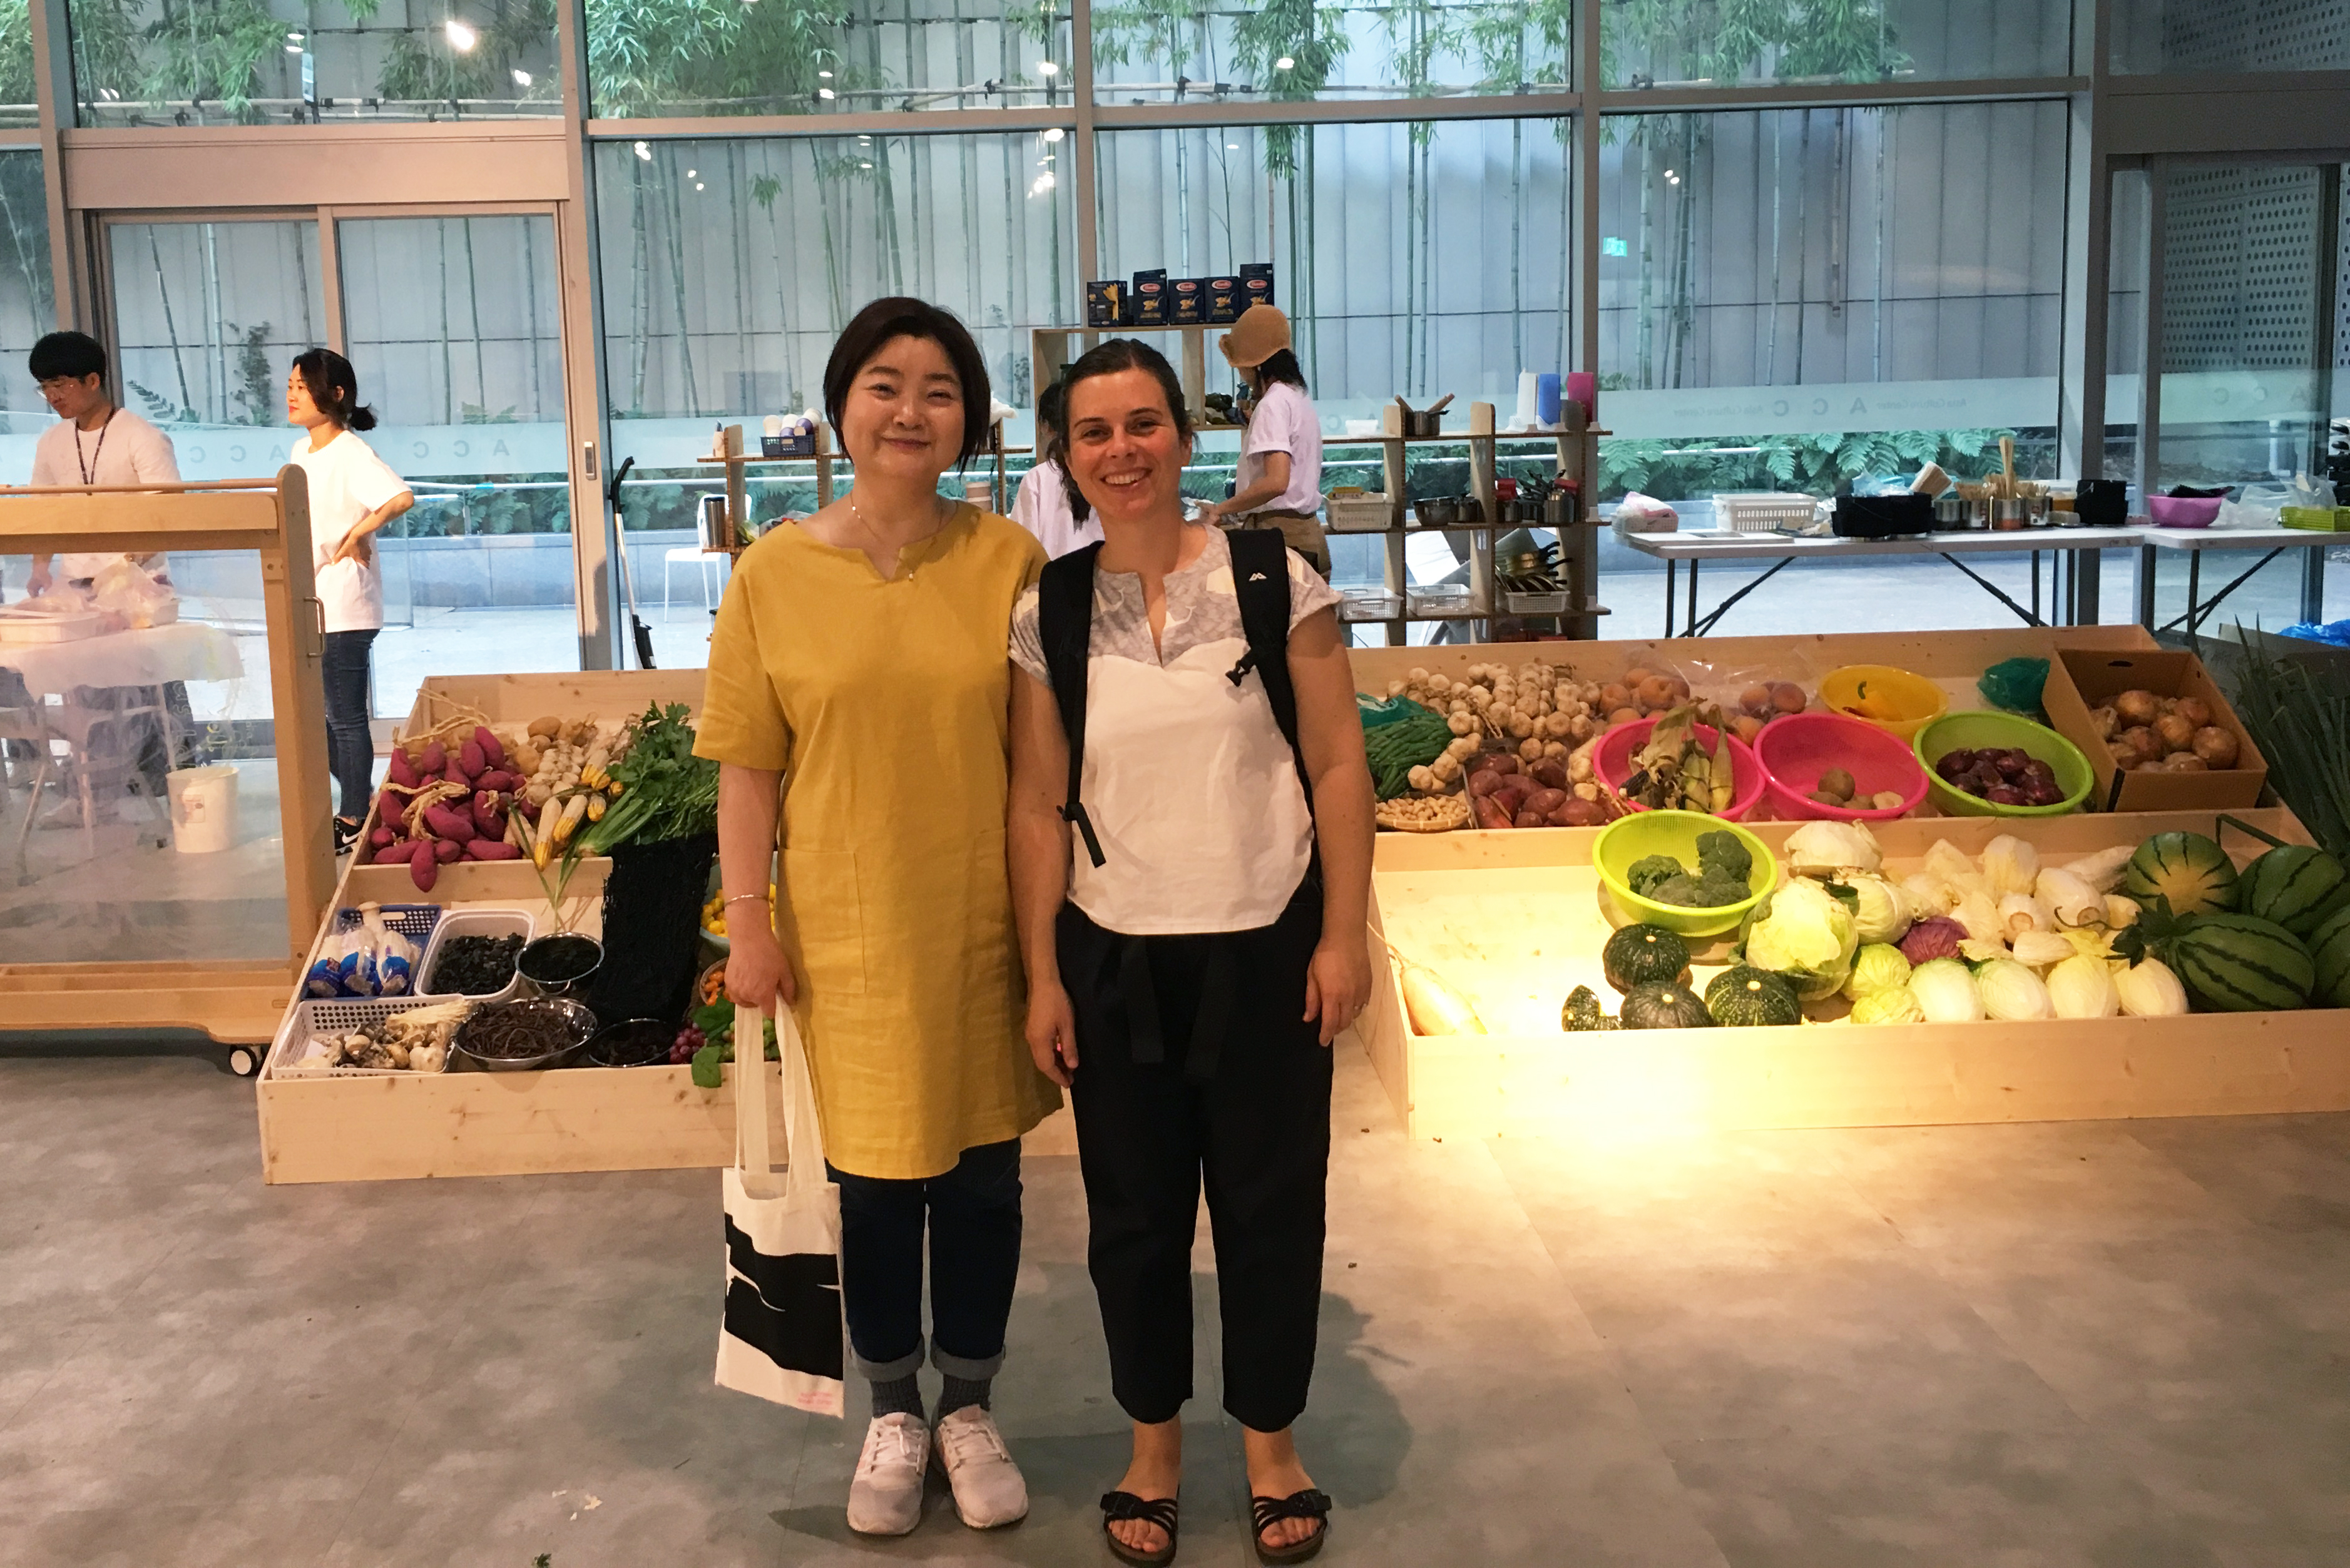 Nolwenn standing with a woman in front of an exhibition of vegetables